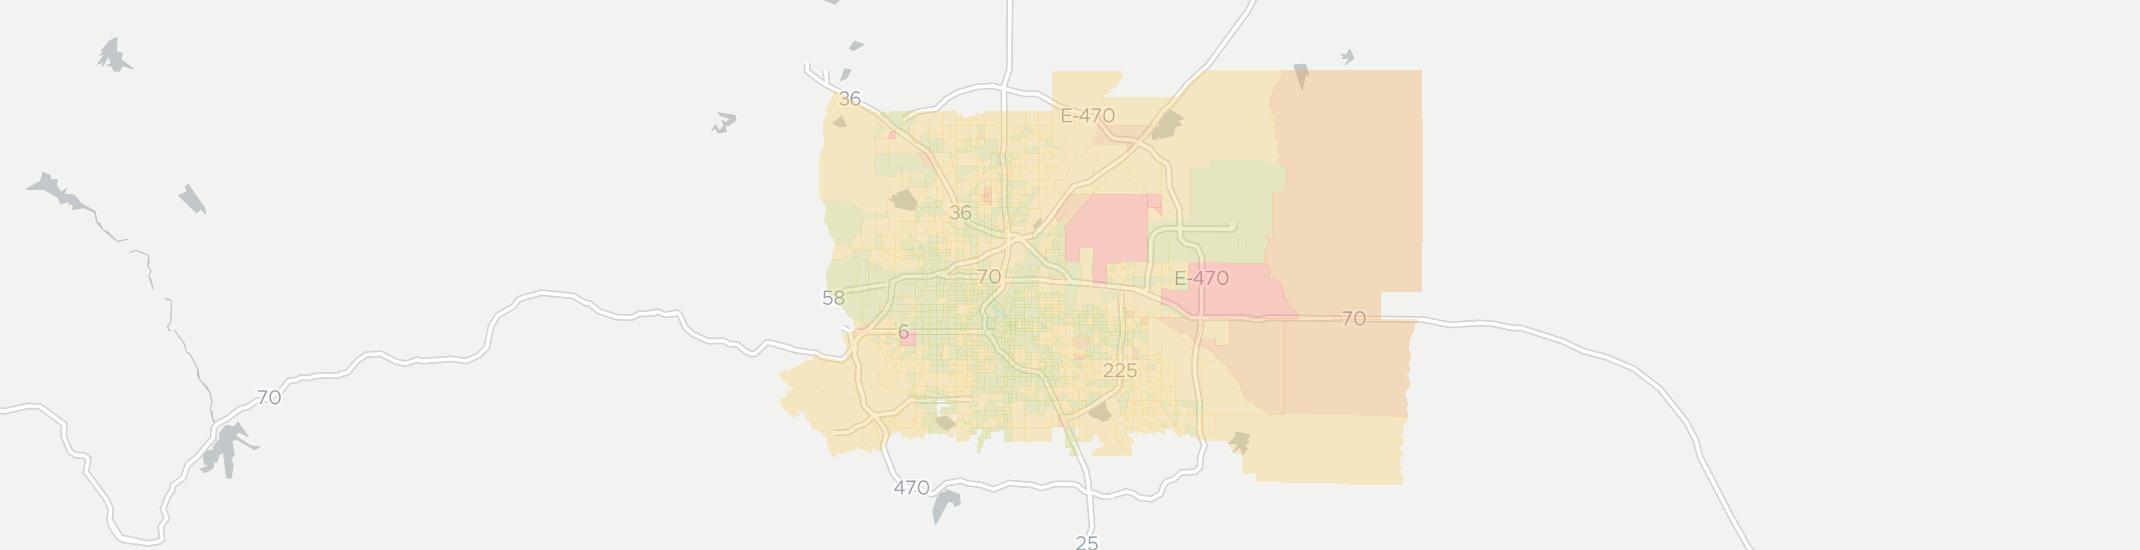 Denver Internet Competition Map. Click for interactive map.